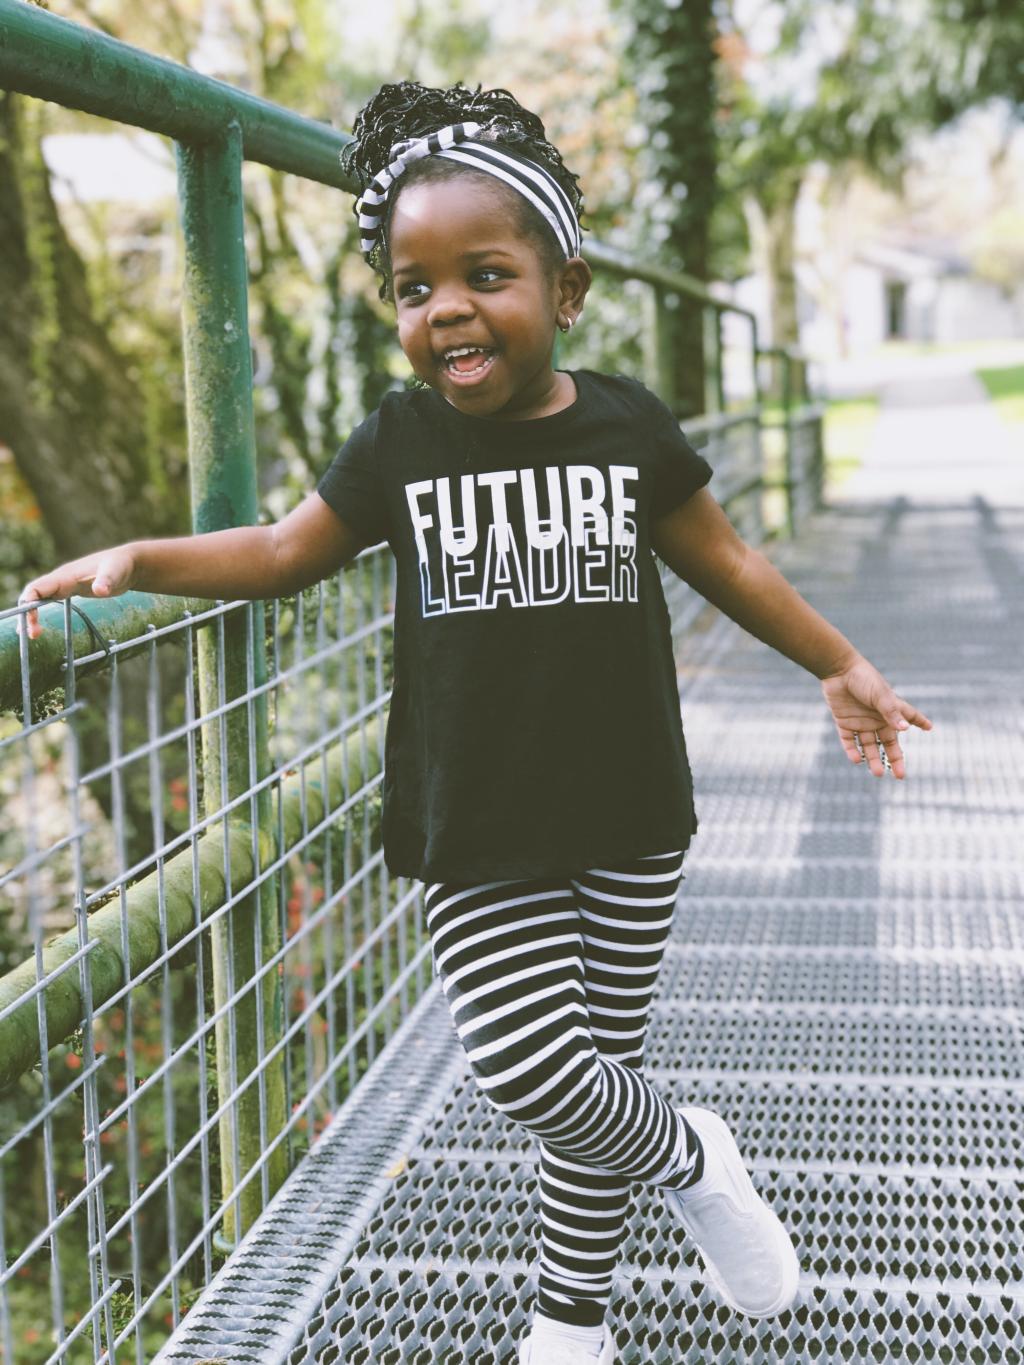 Little girl holding a handrail wearing striped pants, matching head wrap and shirt that reads "Future Leader"